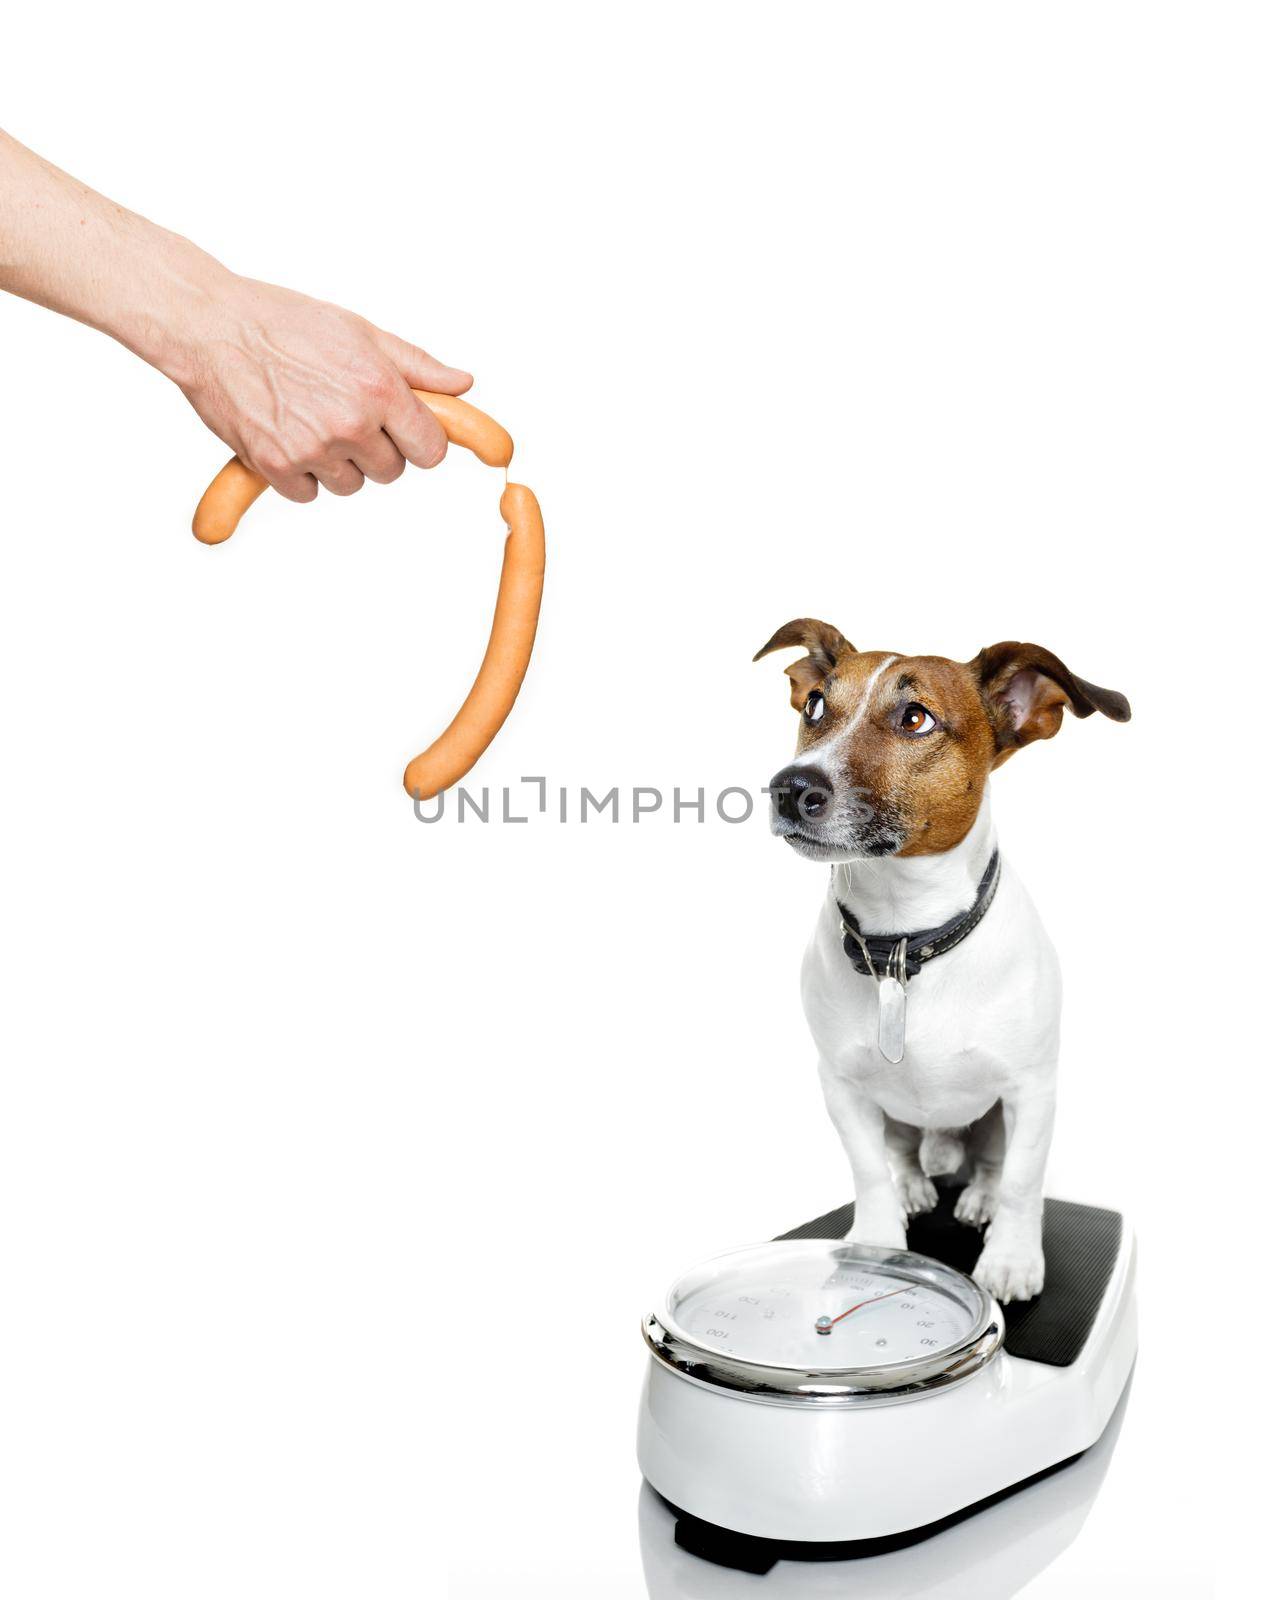 owner punishing dog with sausage for overweight, and to loose weight , standing on a scale, isolated on white background